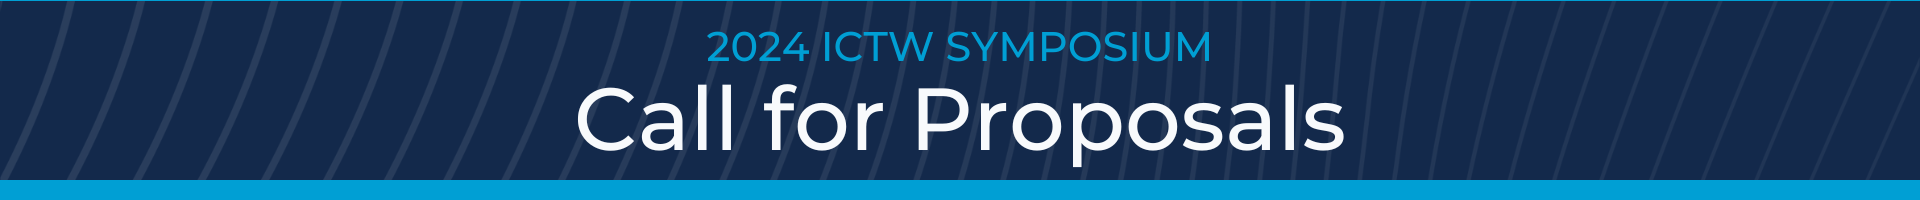 2024 ICTW Symposium Call for Papers